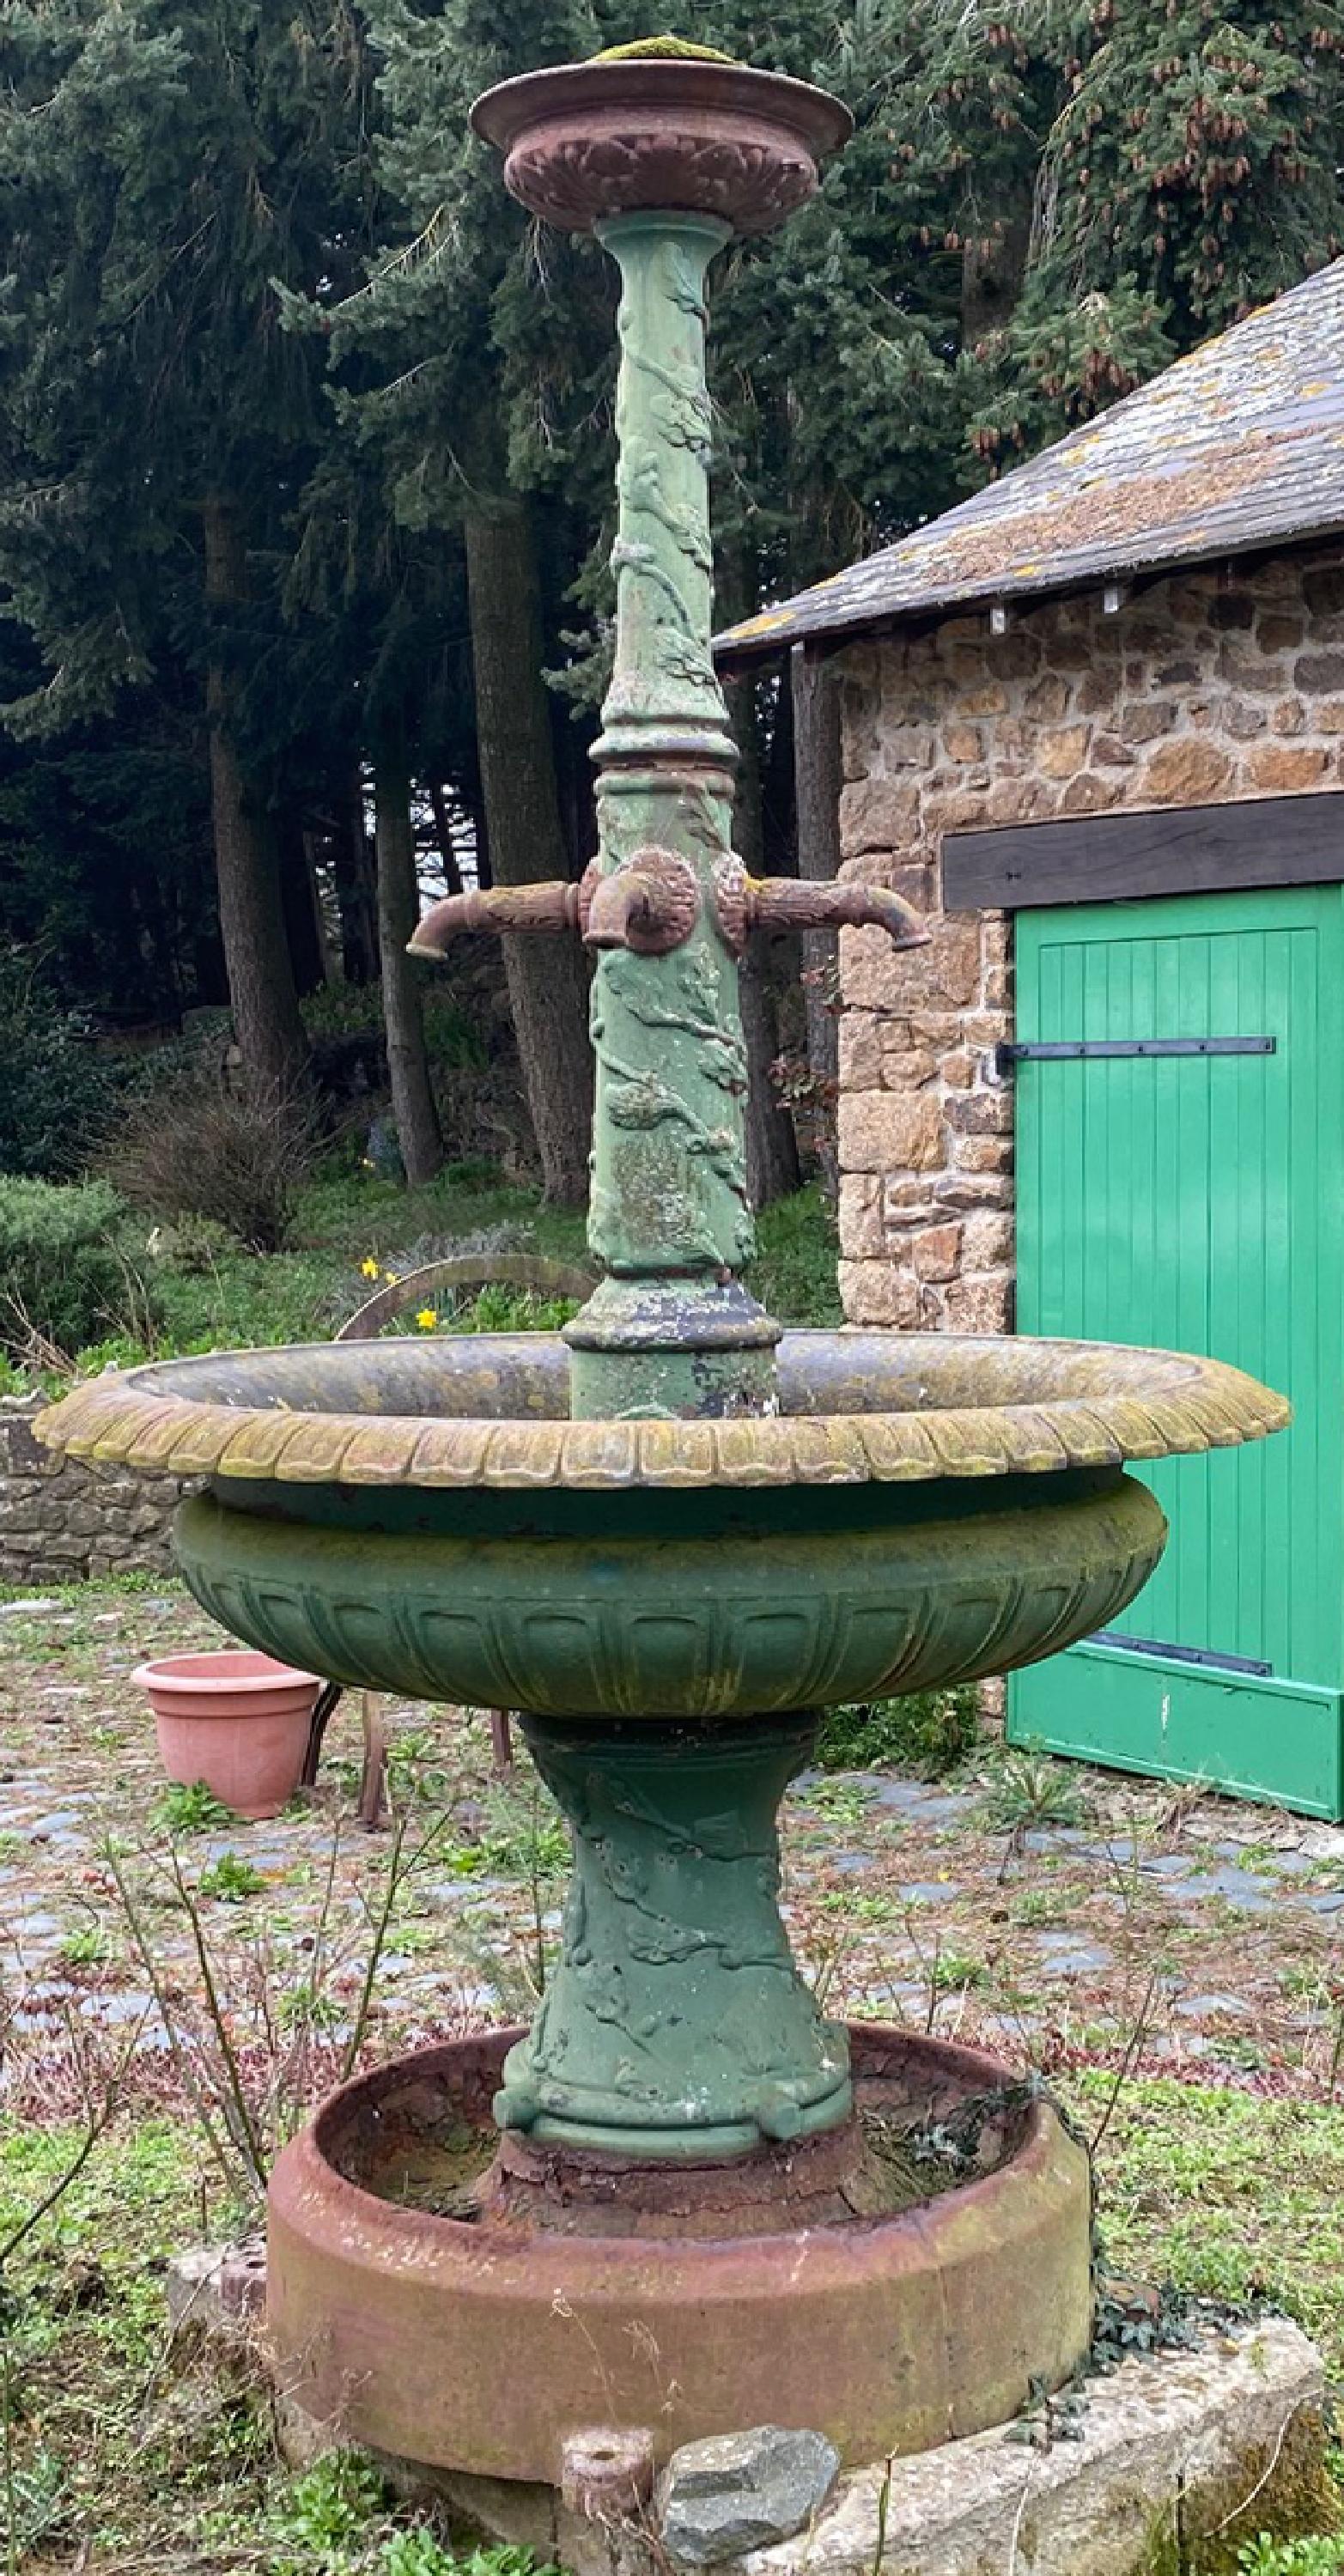 This drinkable city fountain was made at the end of the 19th century. Its circular basin has the same classic form from the precedent centuries, it is put on a foot decorated with oak leaves and acorns. There is on the basin center a column